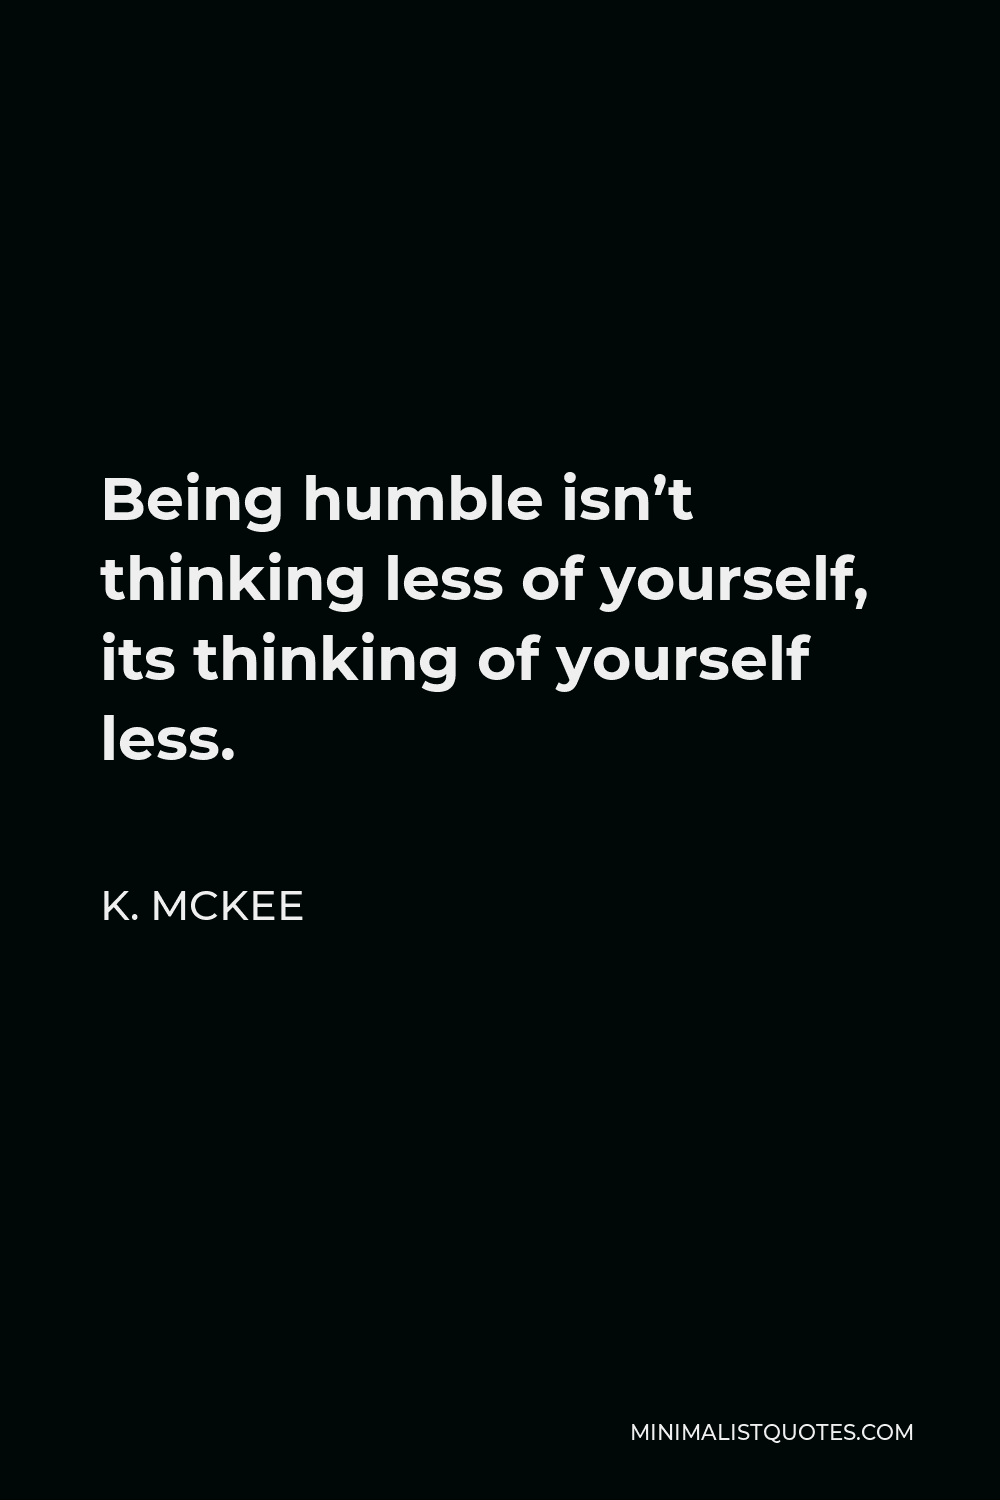 K. Mckee Quote - Being humble isn’t thinking less of yourself, its thinking of yourself less.